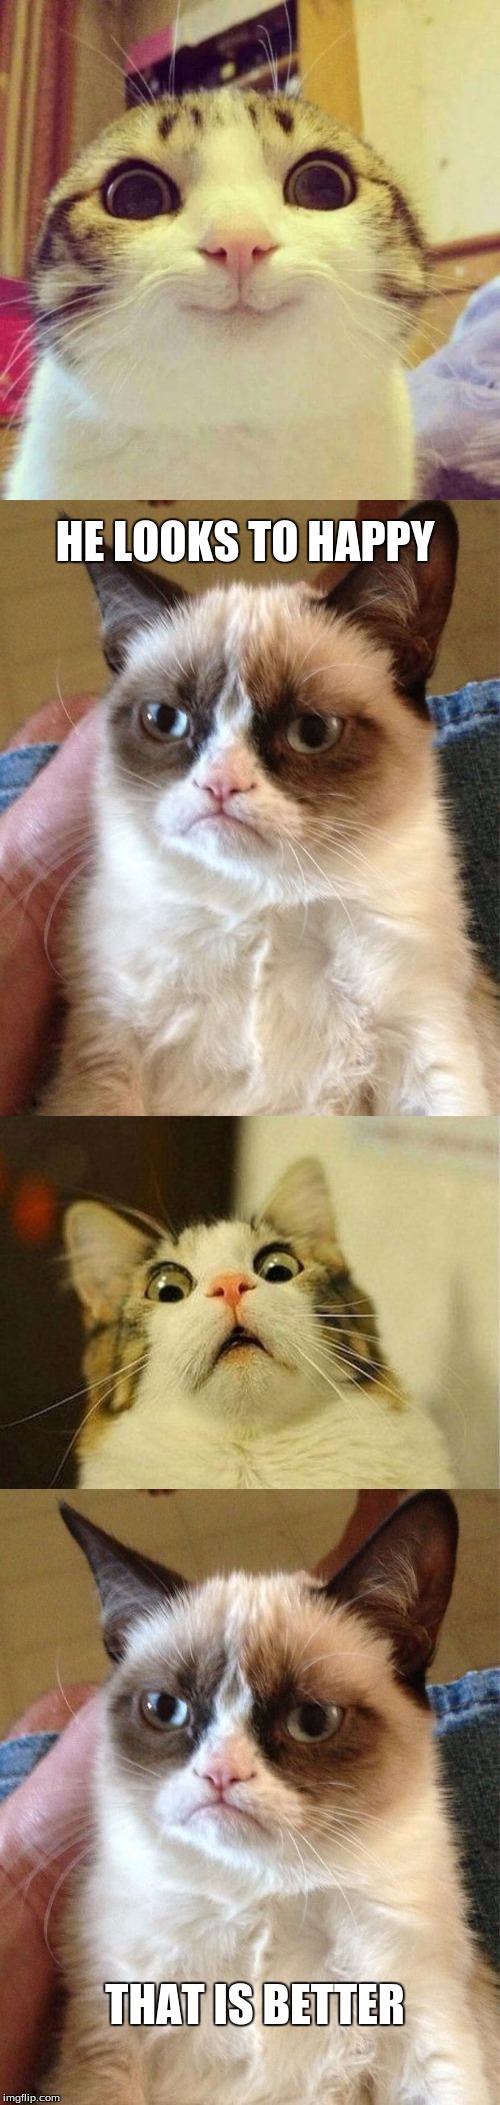 To Happy | HE LOOKS TO HAPPY; THAT IS BETTER | image tagged in grumpy cat,happy cat smiling,scared cat | made w/ Imgflip meme maker